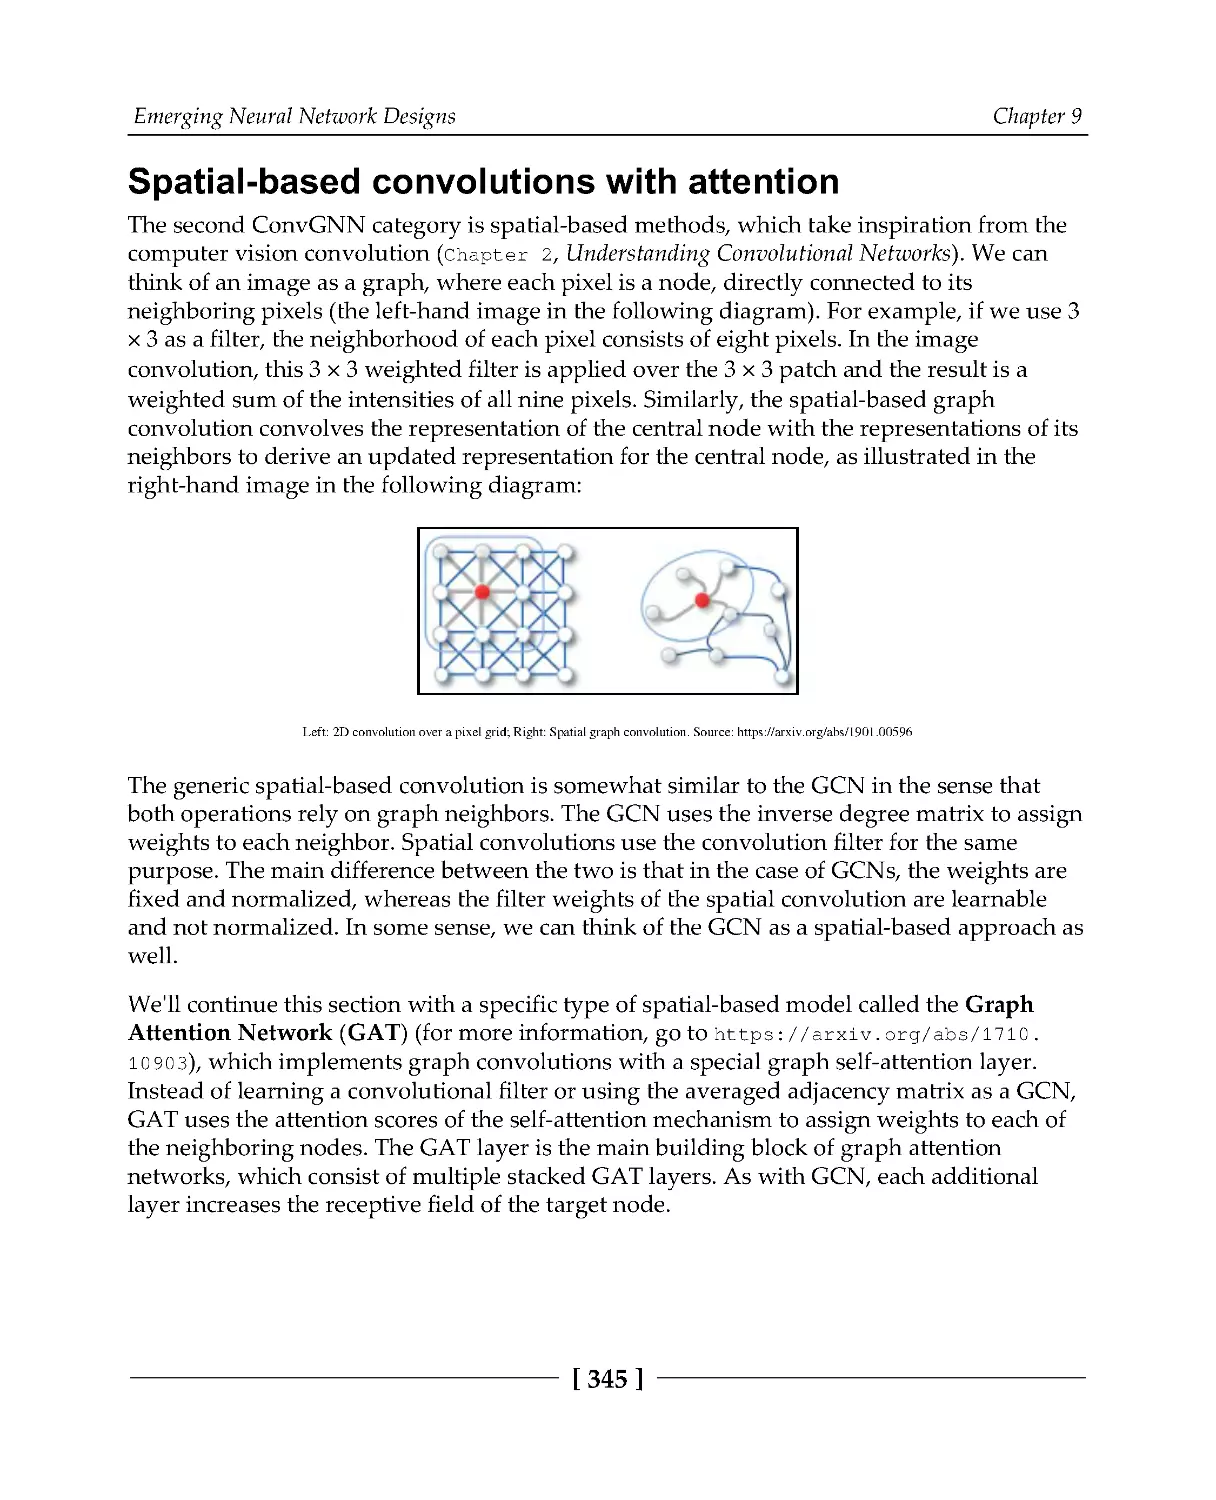 Spatial-based convolutions with attention